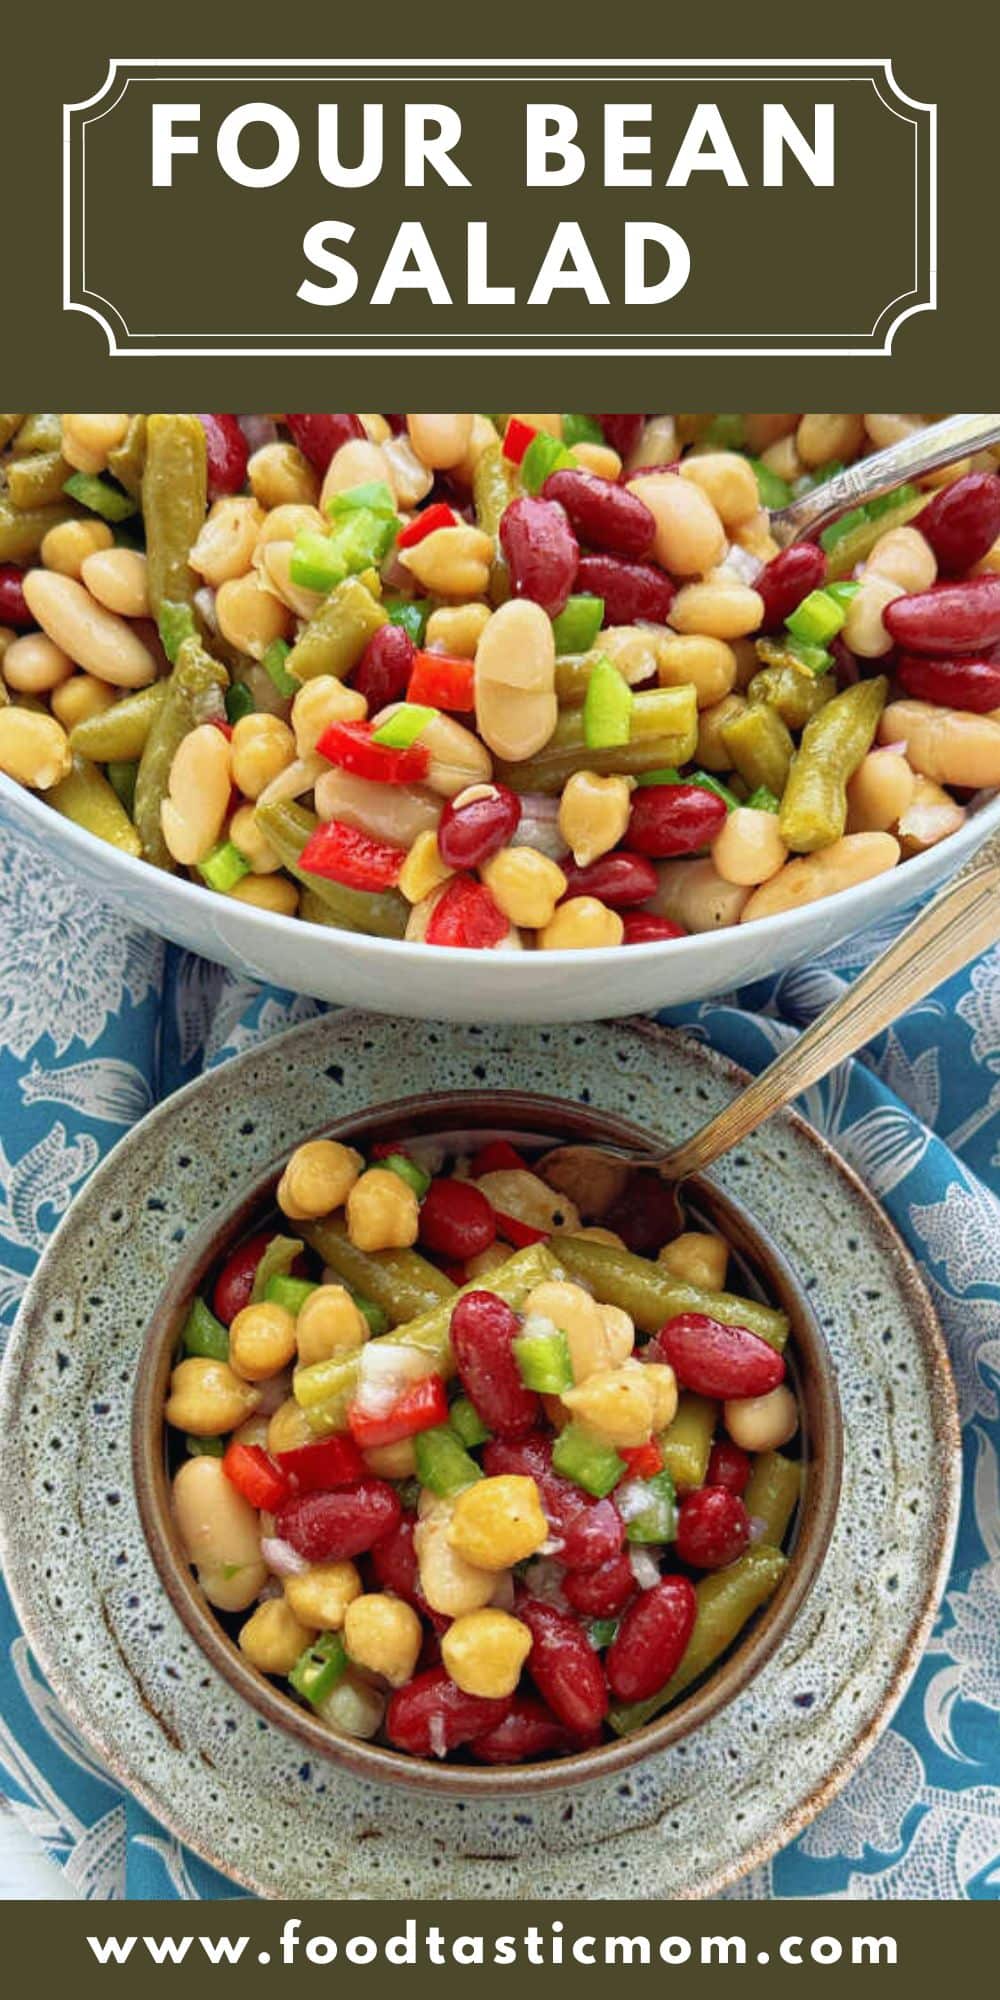 4 Bean Salad is a nutritious salad that can be made ahead. Economical, packed with protein and fiber, it's a perfect side dish for picnics and potlucks. via @foodtasticmom